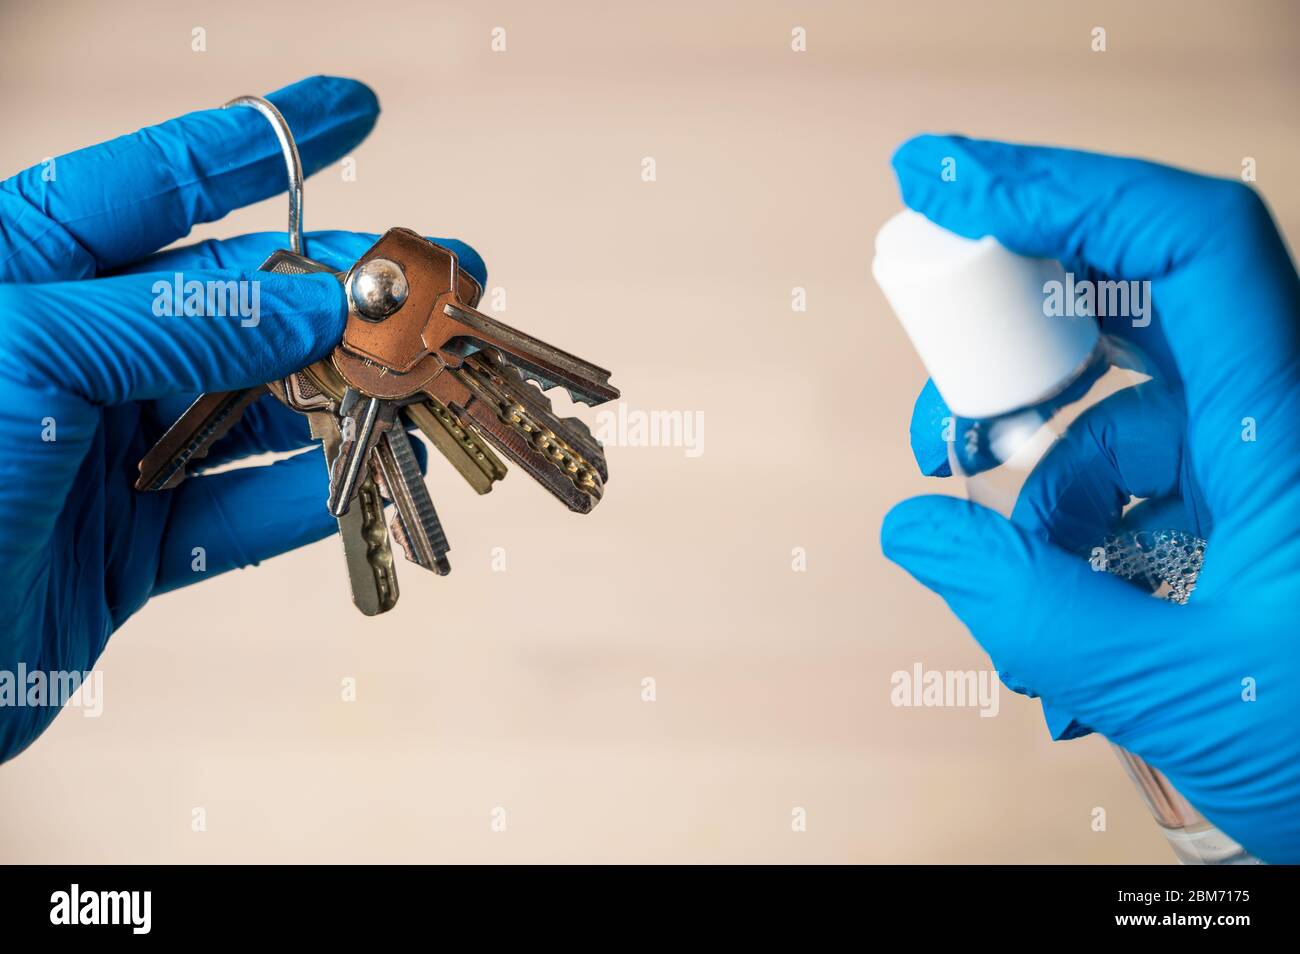 Cleaning and disinfecting keys. Cleaning personal items from virus, microbes and dirt. Coronavirus prevention concept and safety measures. Stock Photo